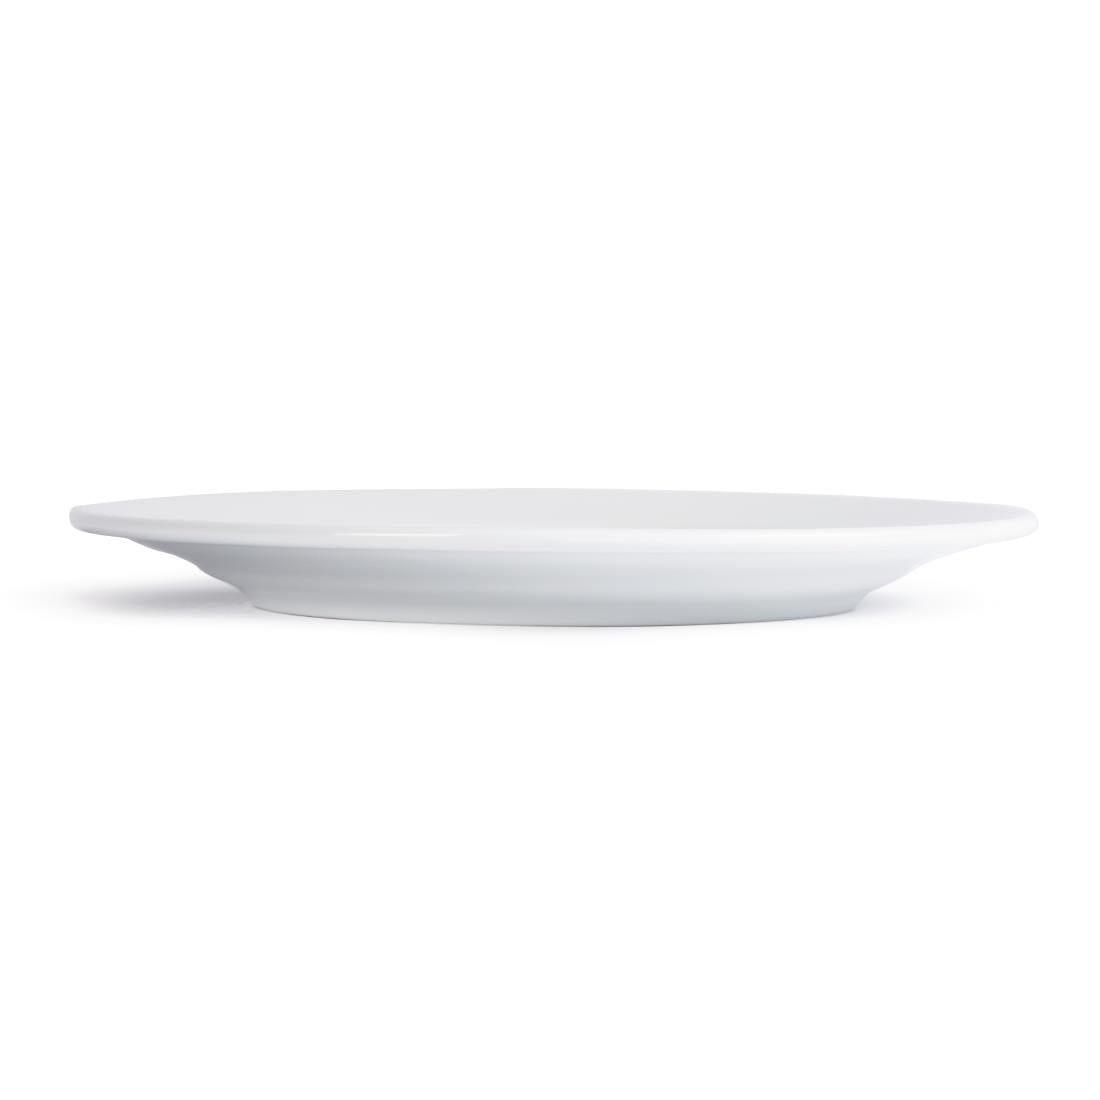 CG008 Royal Porcelain Classic White Wide Rim Plates 240mm (Pack of 12)